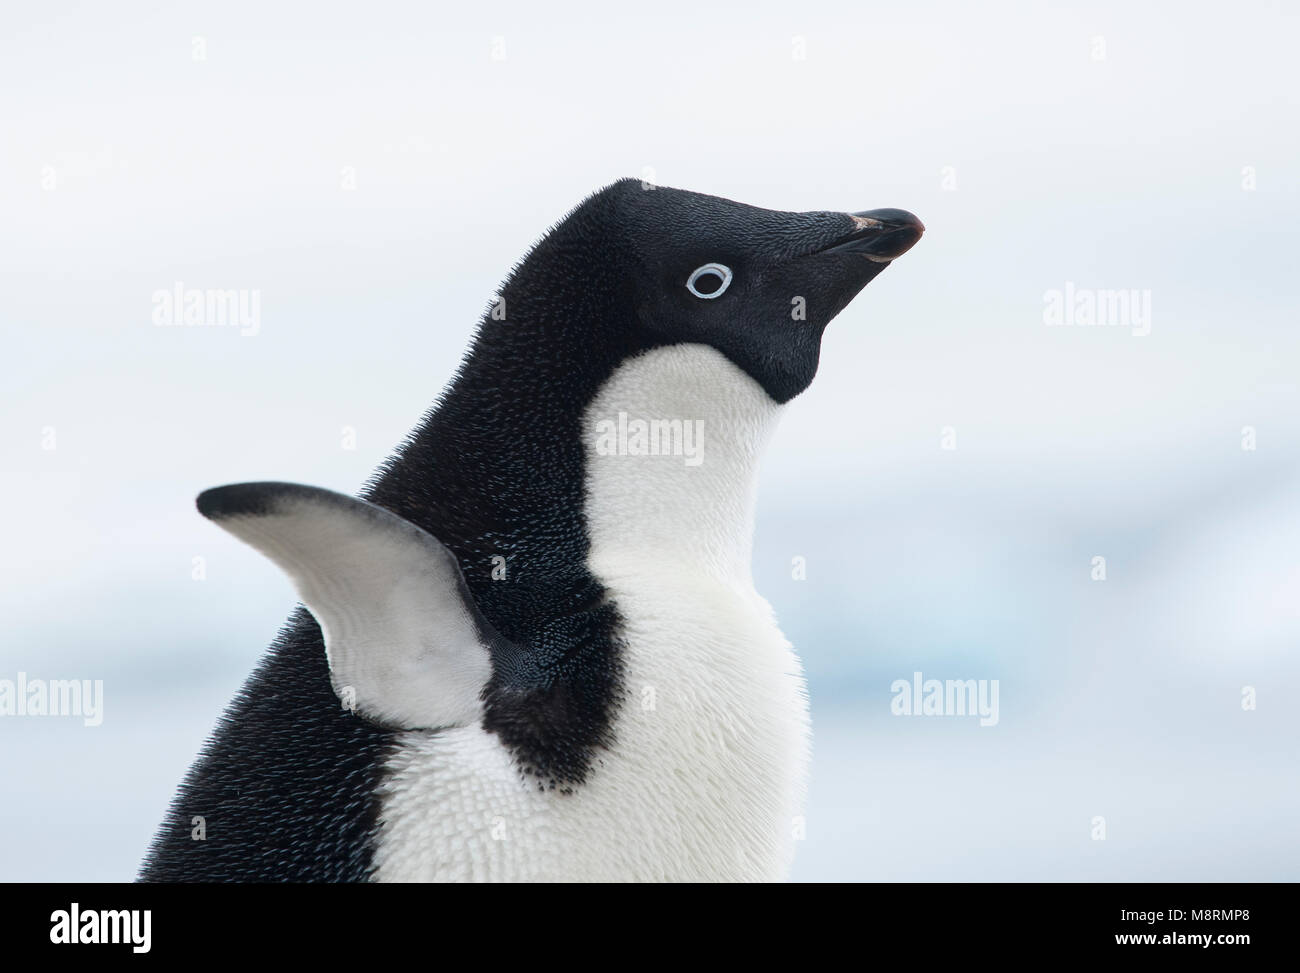 An Adelie penguin stretches its wings in Antarctica. Stock Photo